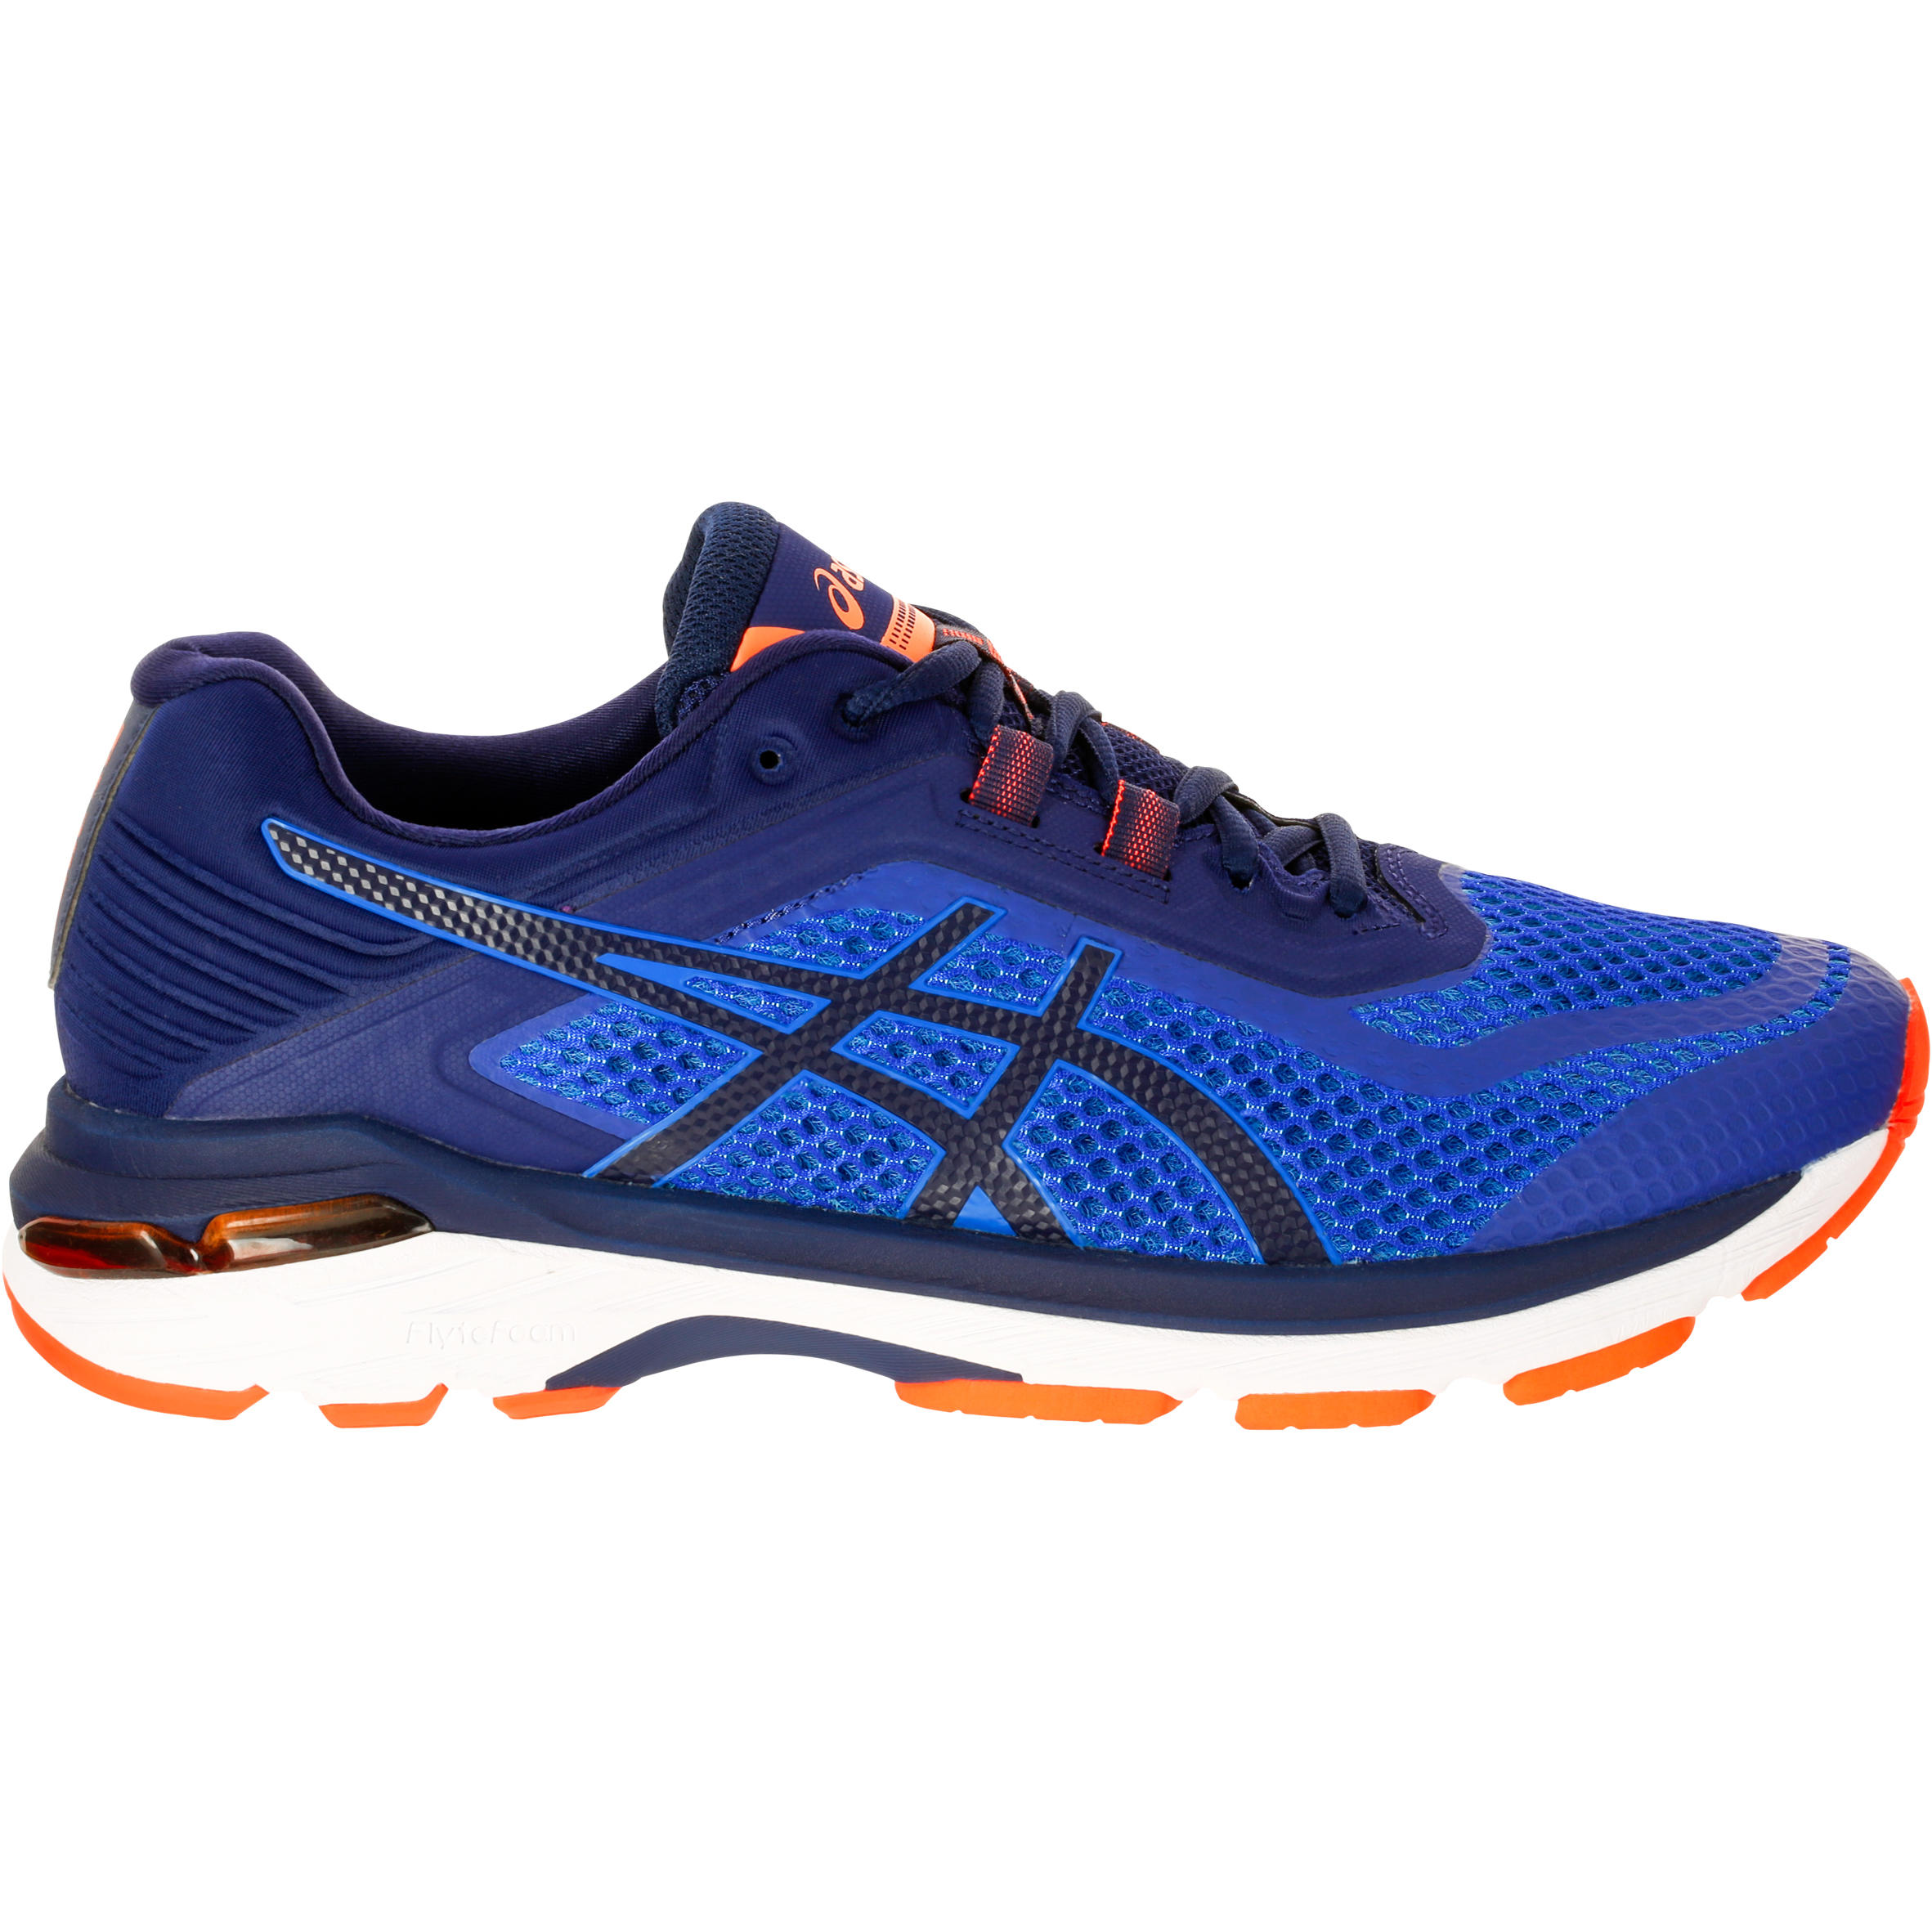 Asics Gt 6 | TO 52% OFF